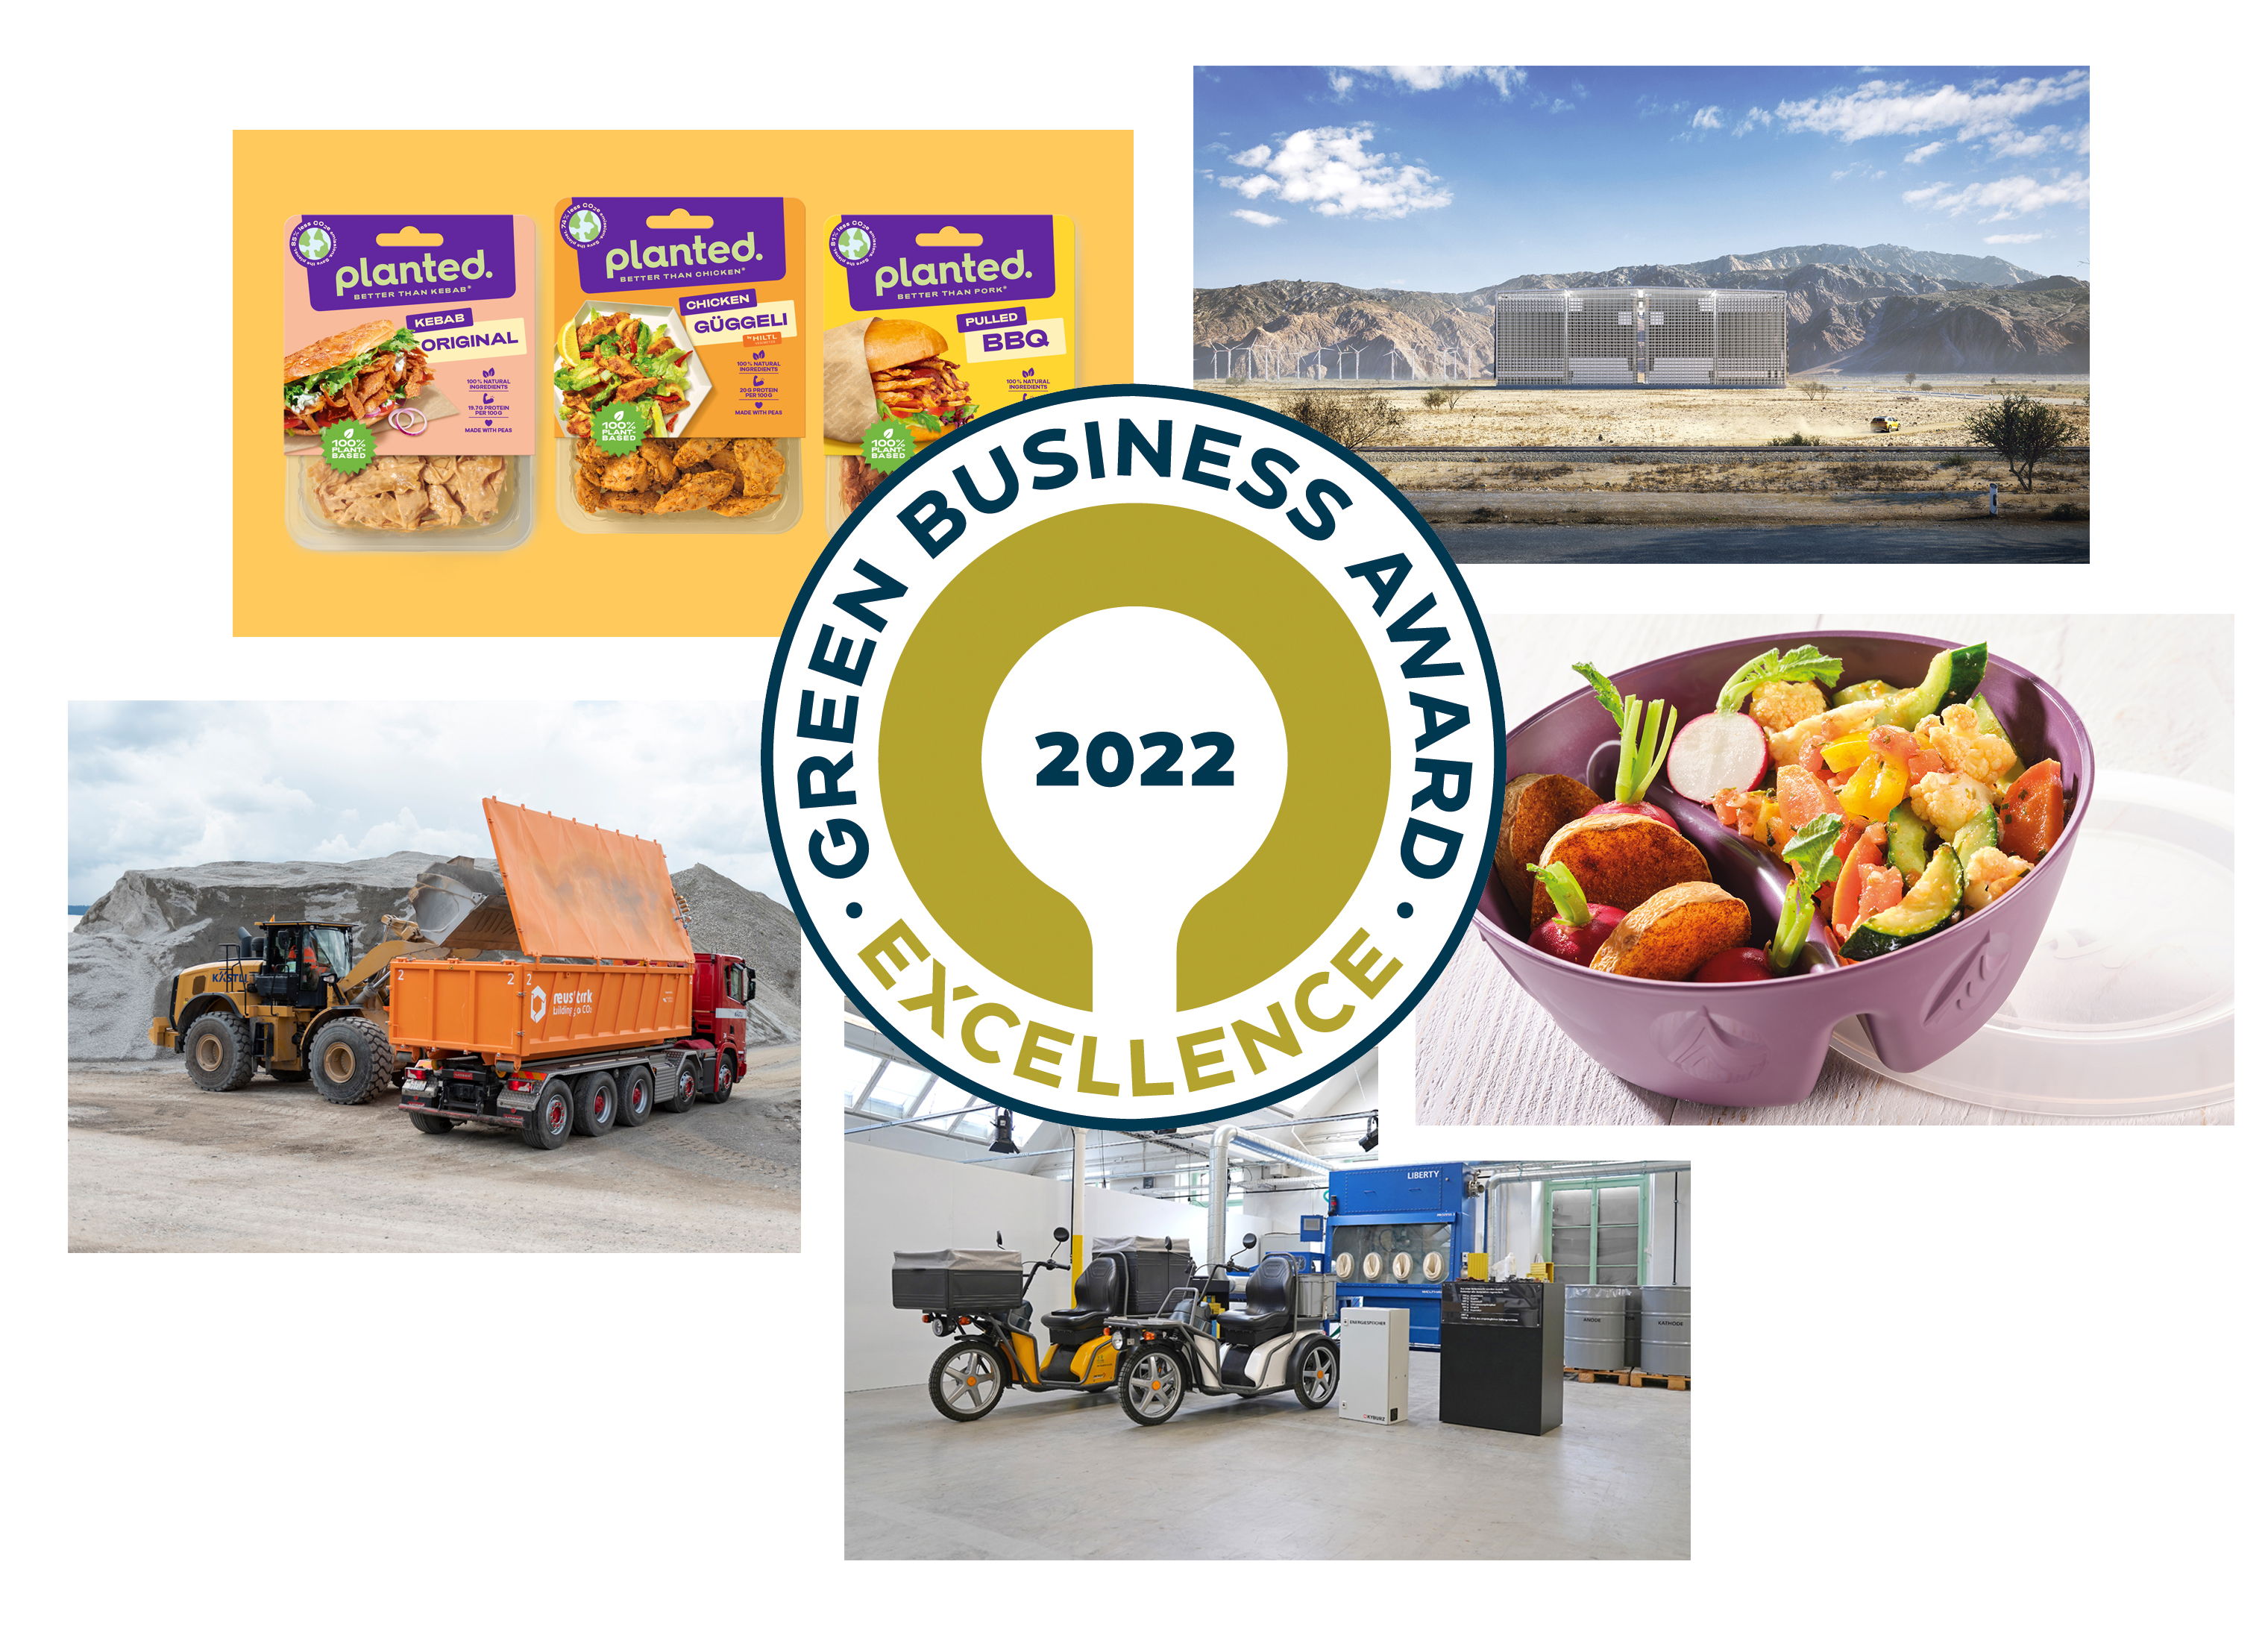 Green Business Award honours five companies with ‘Excellence’ rating